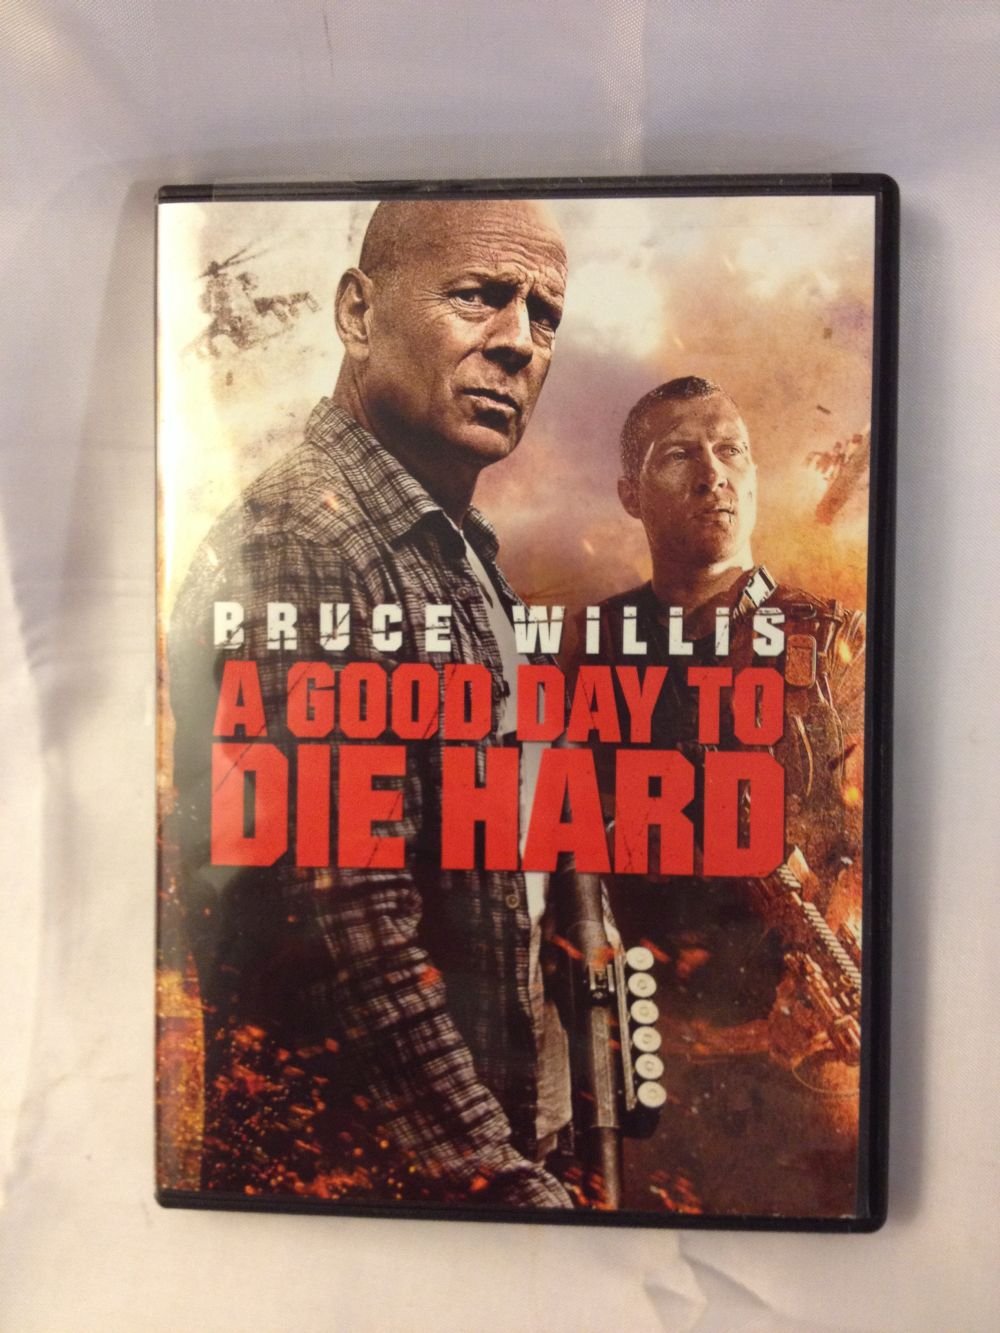 A Good Day To Die Hard (Widescreen) (DVD) - image 1 of 2